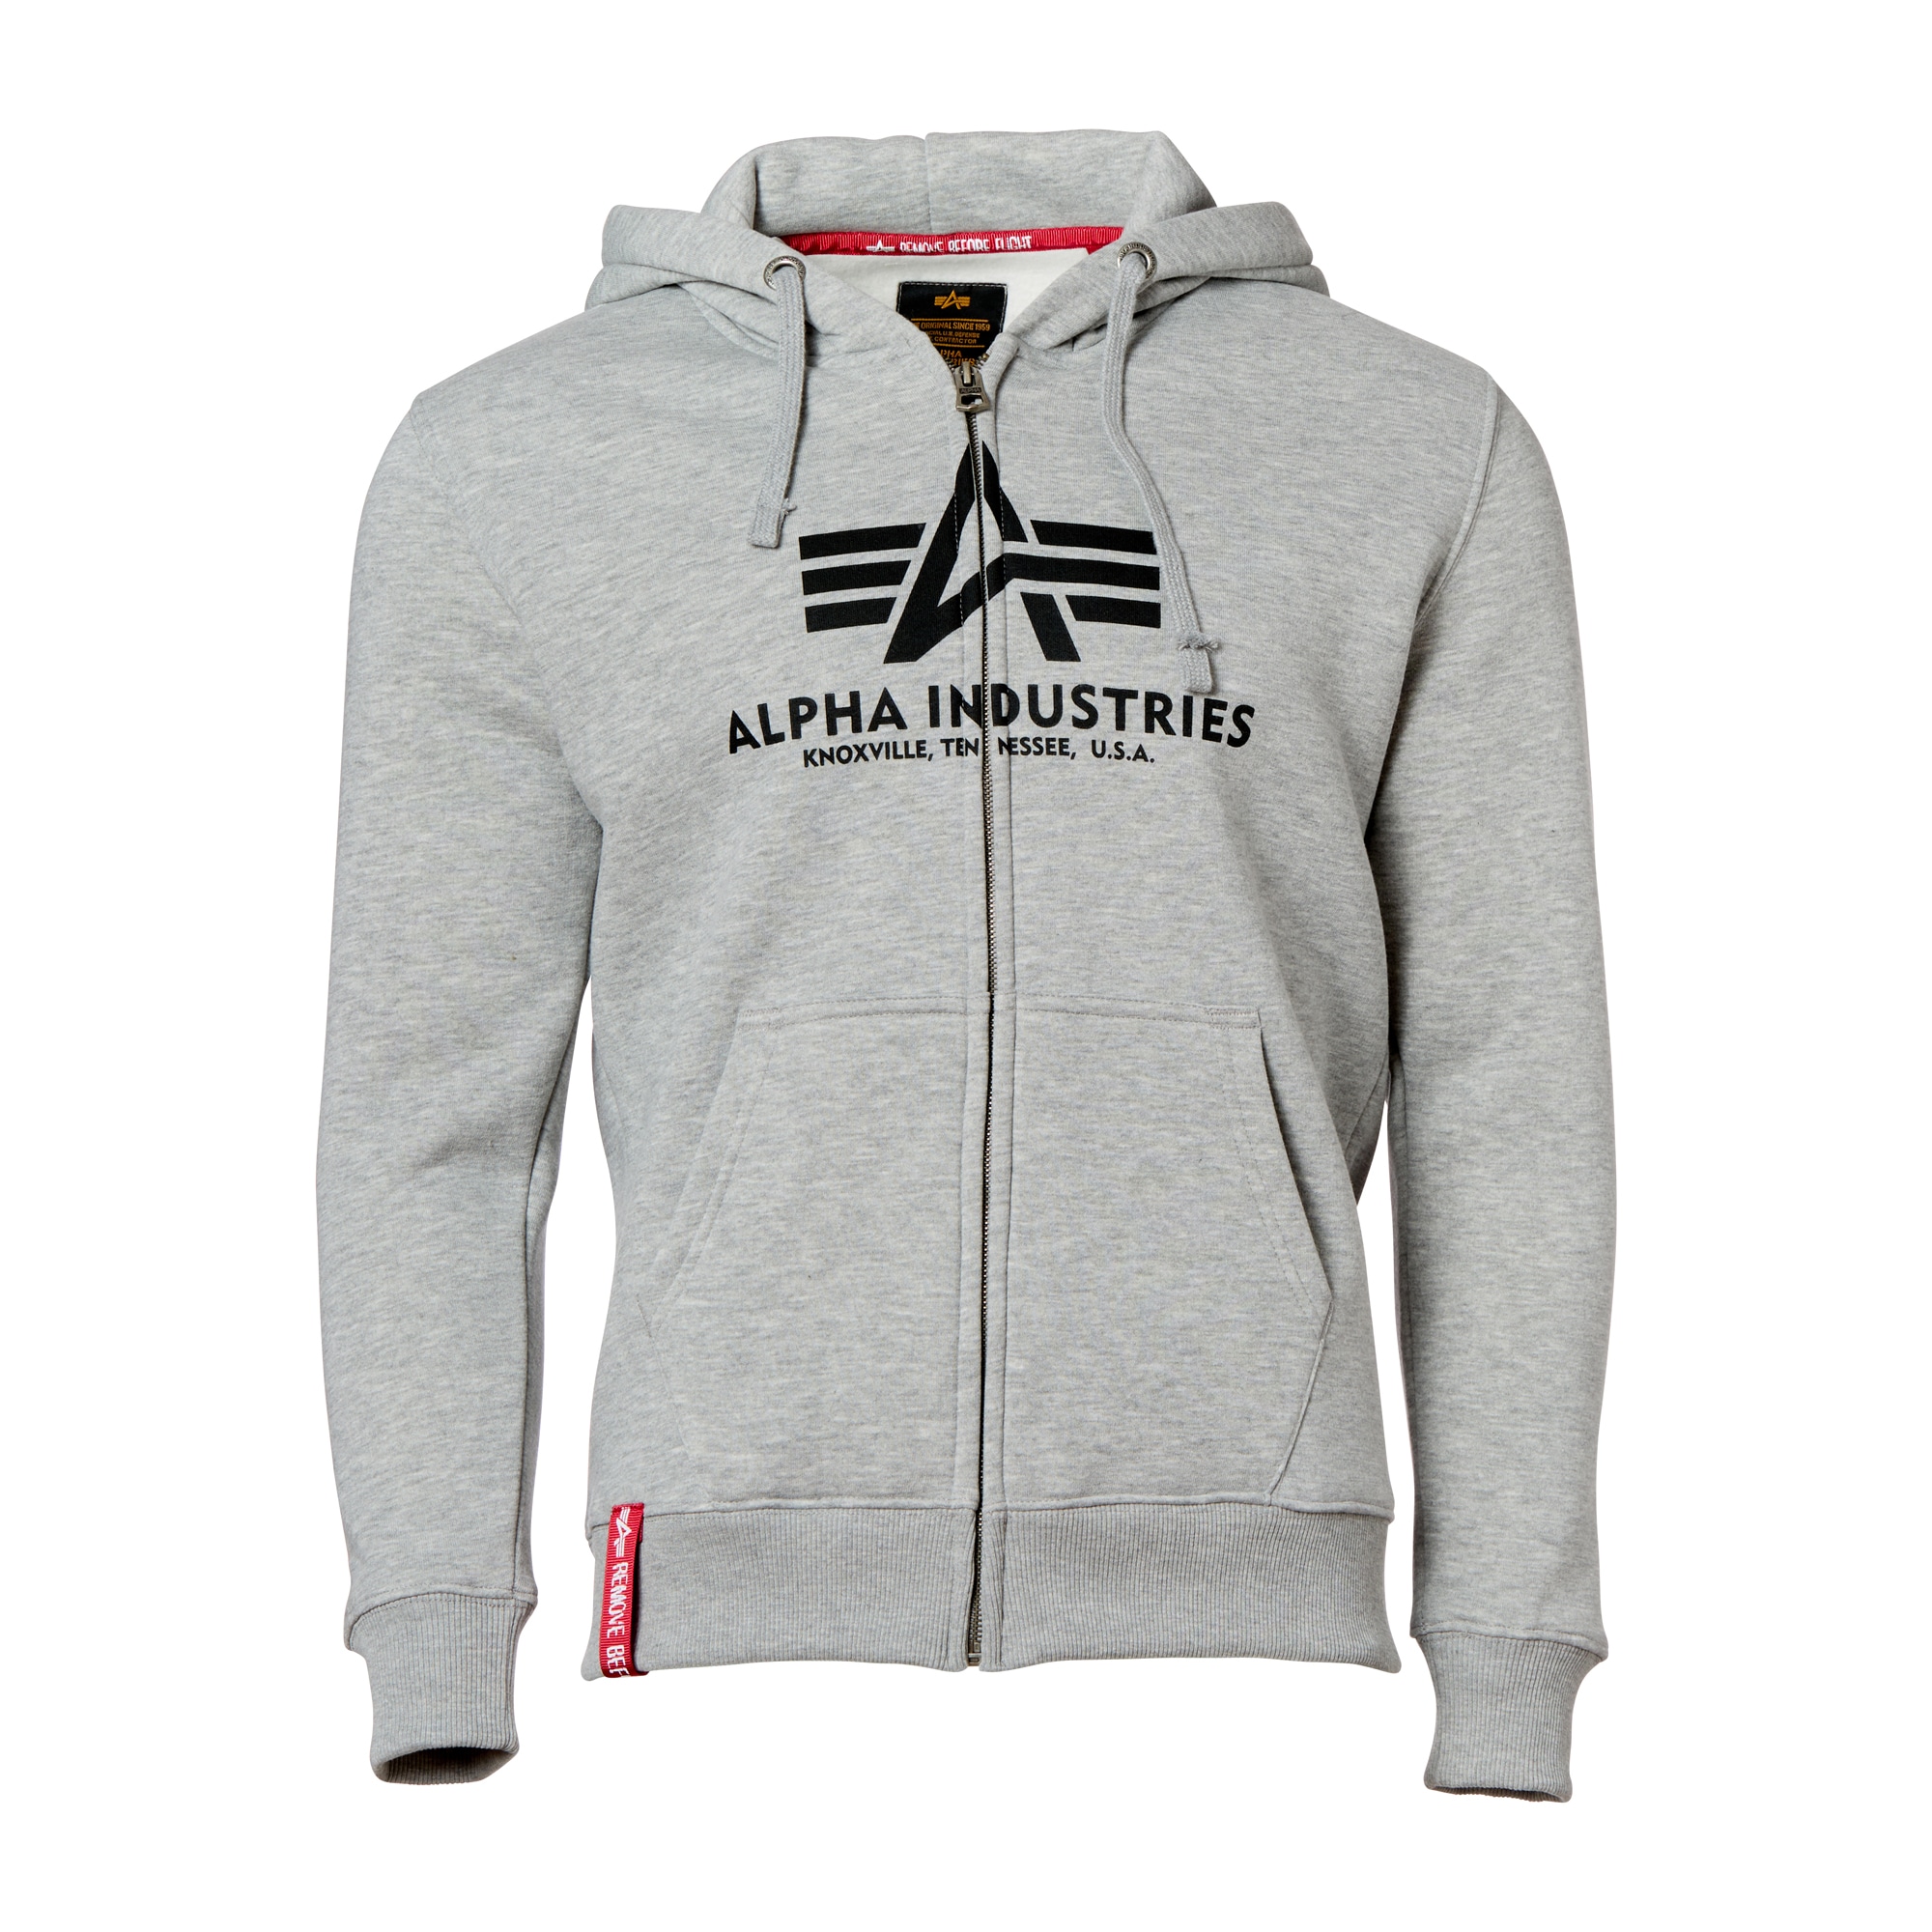 Purchase the Alpha Industries Hoodie Basic Zip grey heather by A